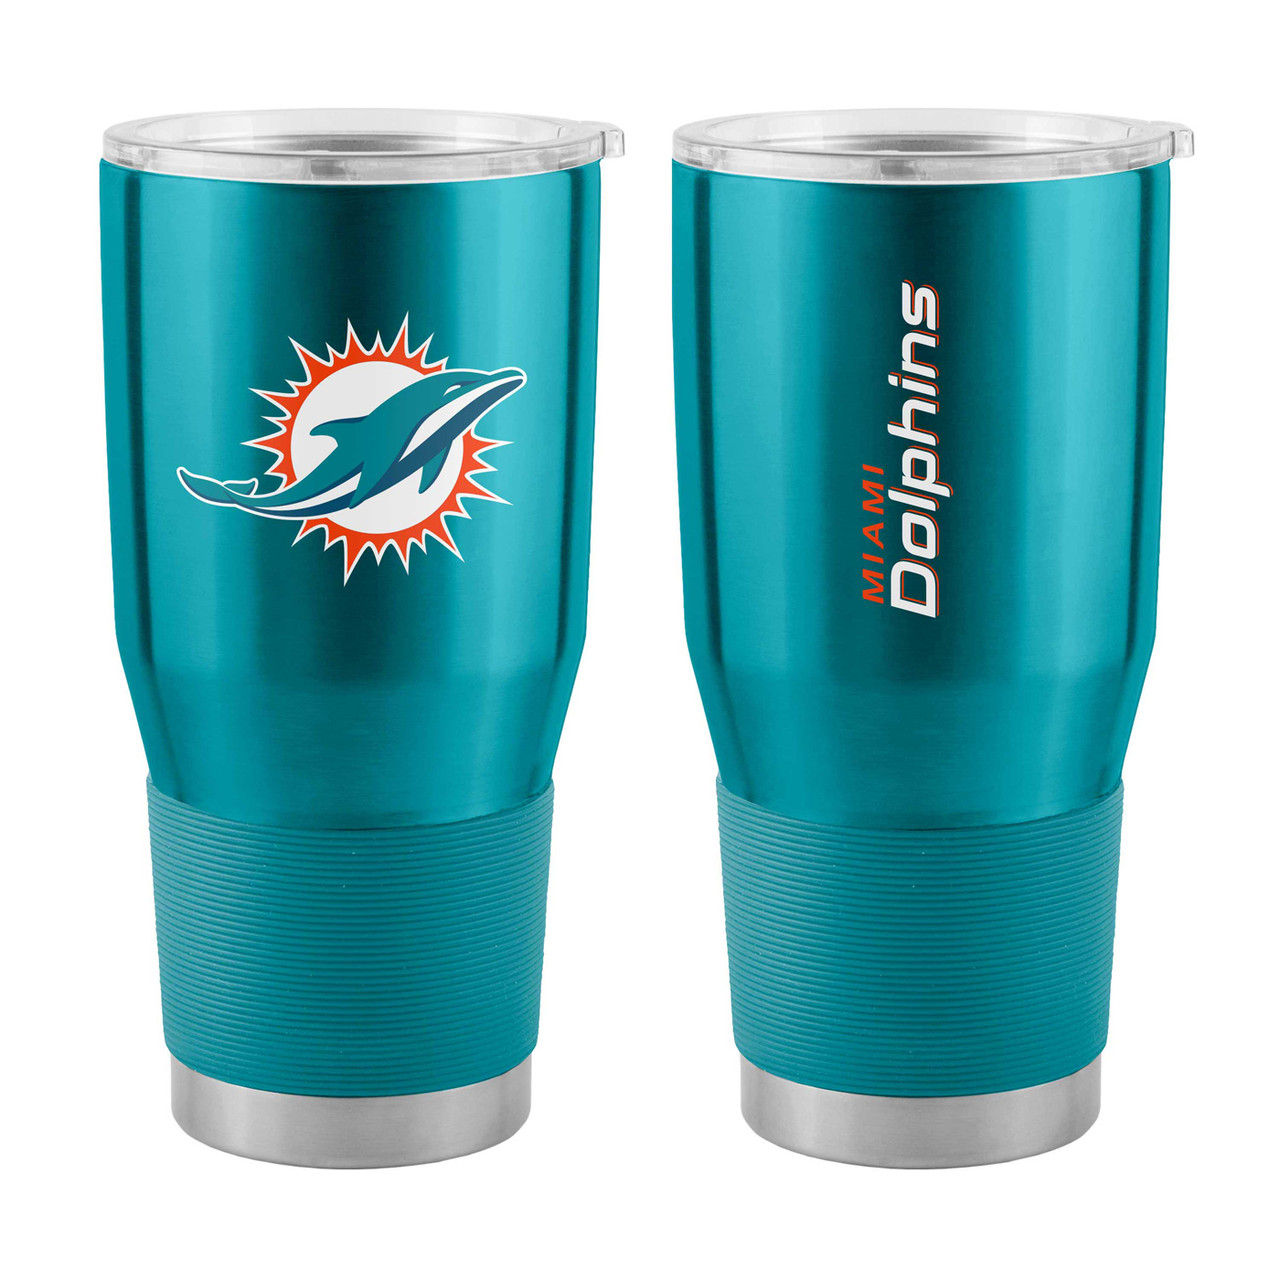 https://cdn11.bigcommerce.com/s-qq5h9nclzt/images/stencil/1280x1280/products/36274/57139/miami-dolphins-30-oz-gameday-stainless-steel-tumbler_mainProductImage_Full__78640.1686894955.jpg?c=1